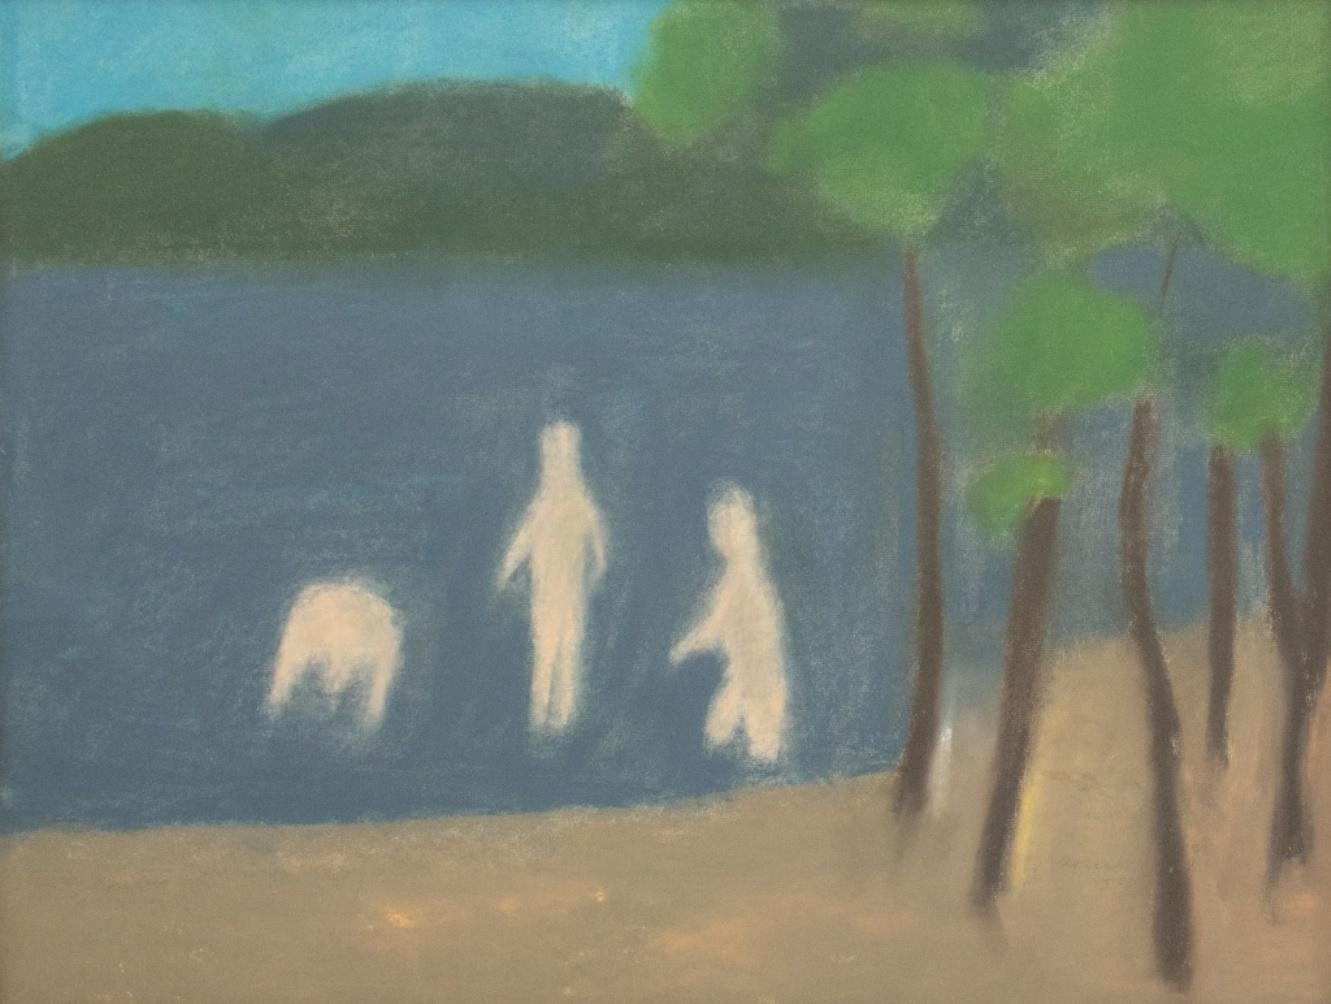 Midcentury abstract landscape gouache on paper depicting three human figures on a lake, signed in pencil 